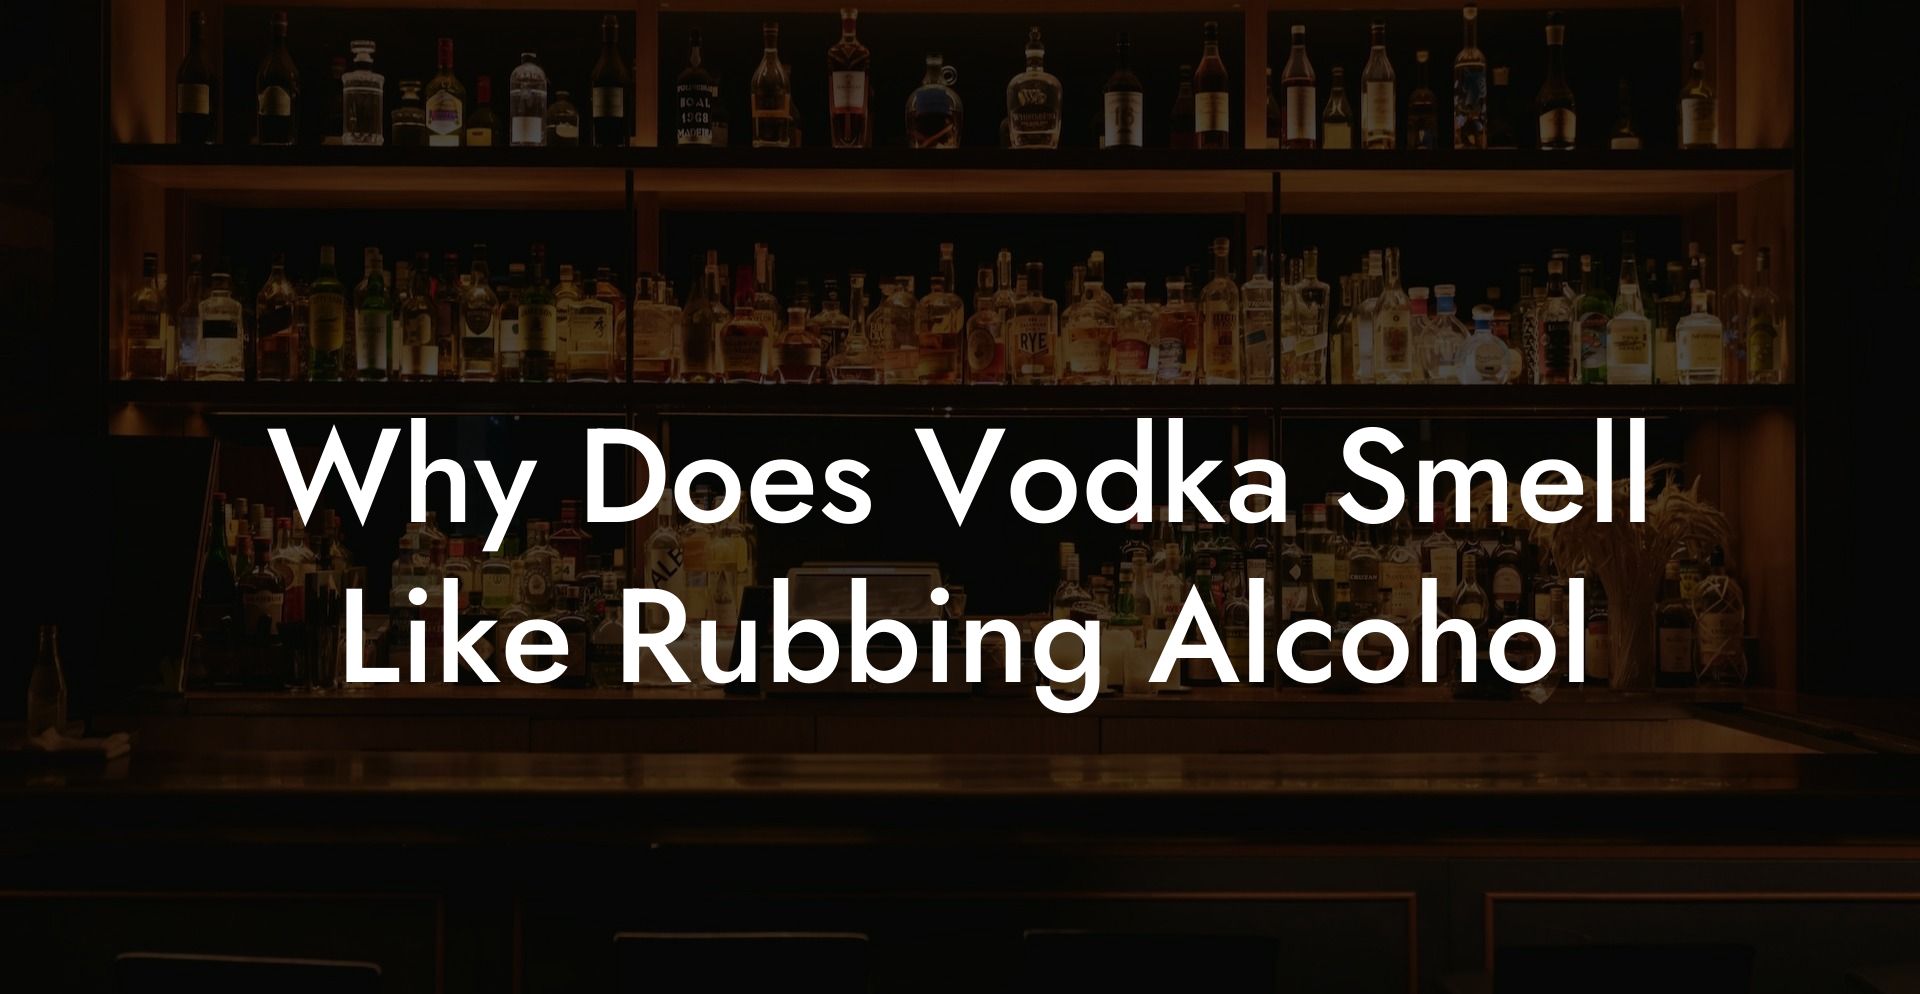 Why Does Vodka Smell Like Rubbing Alcohol